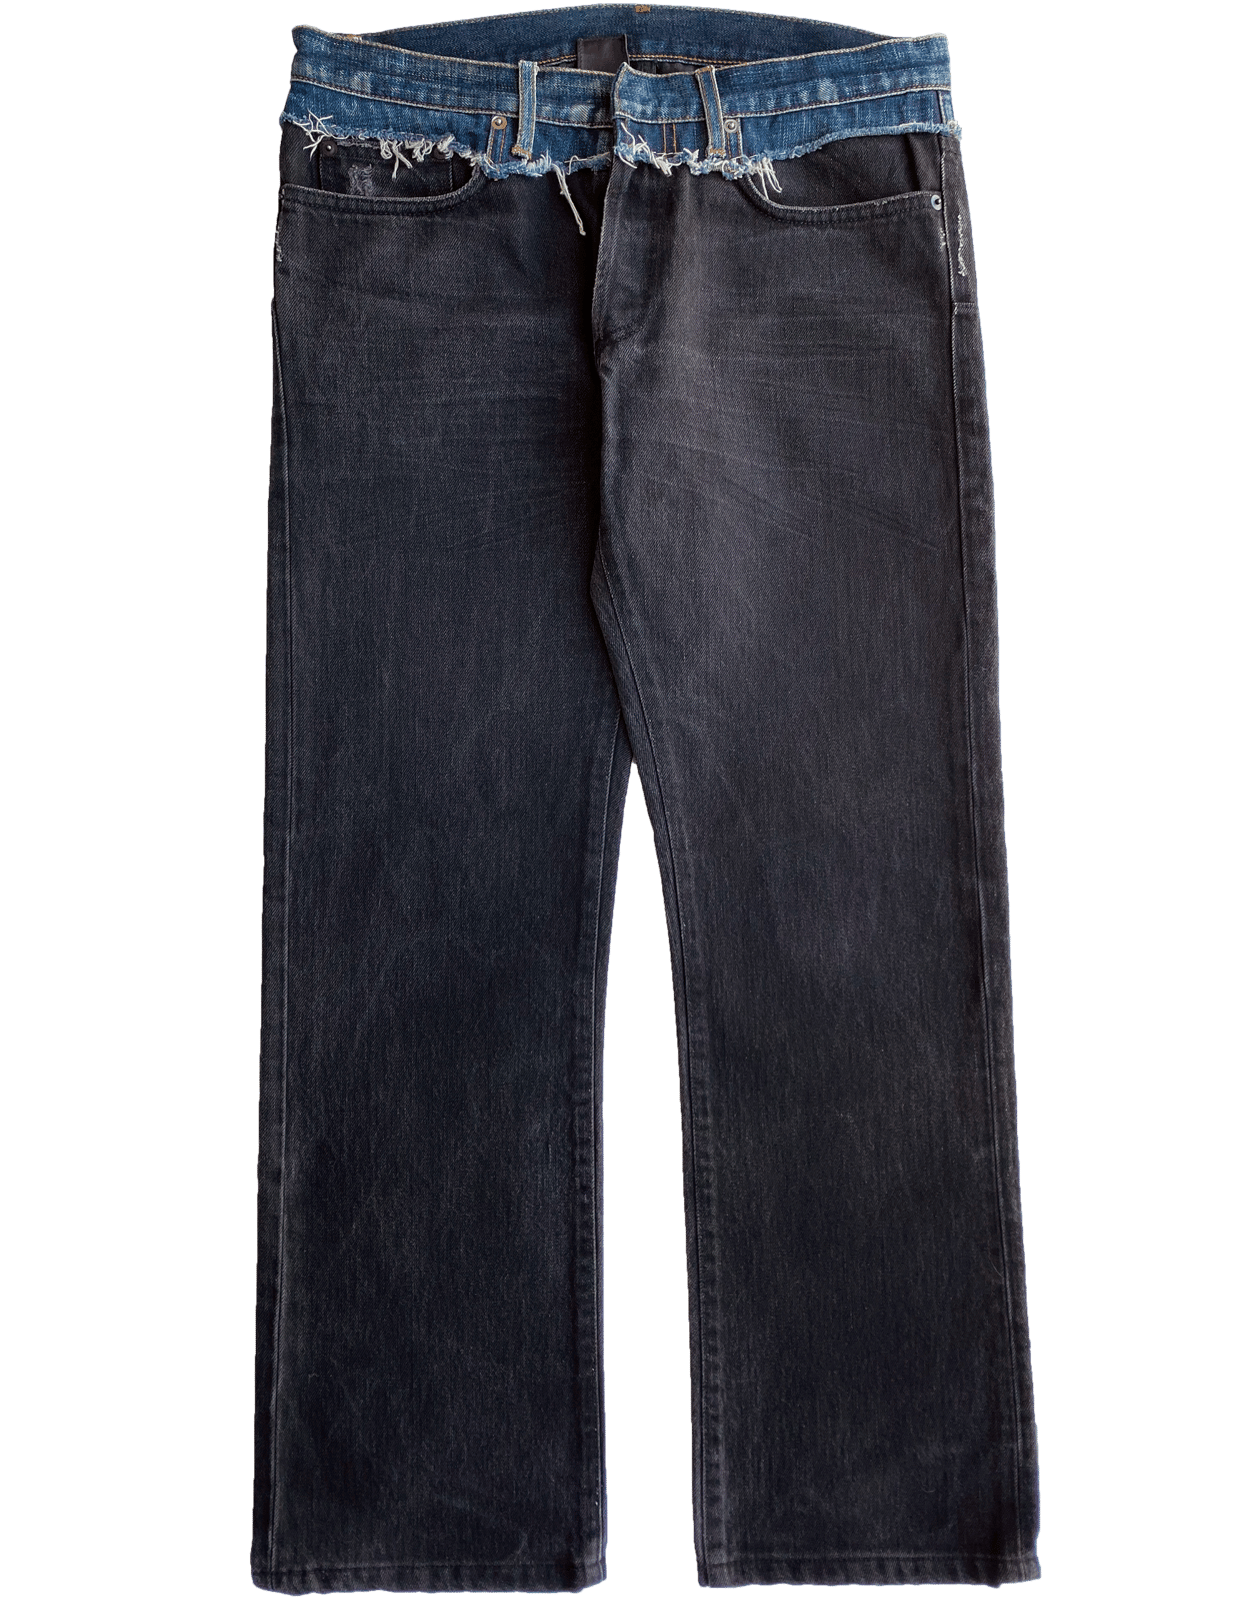 DIOR HOMME BY KRISS VAN ASSCHE LIGHTLY DISTRESSED JEANS  27  BANAL PIECES